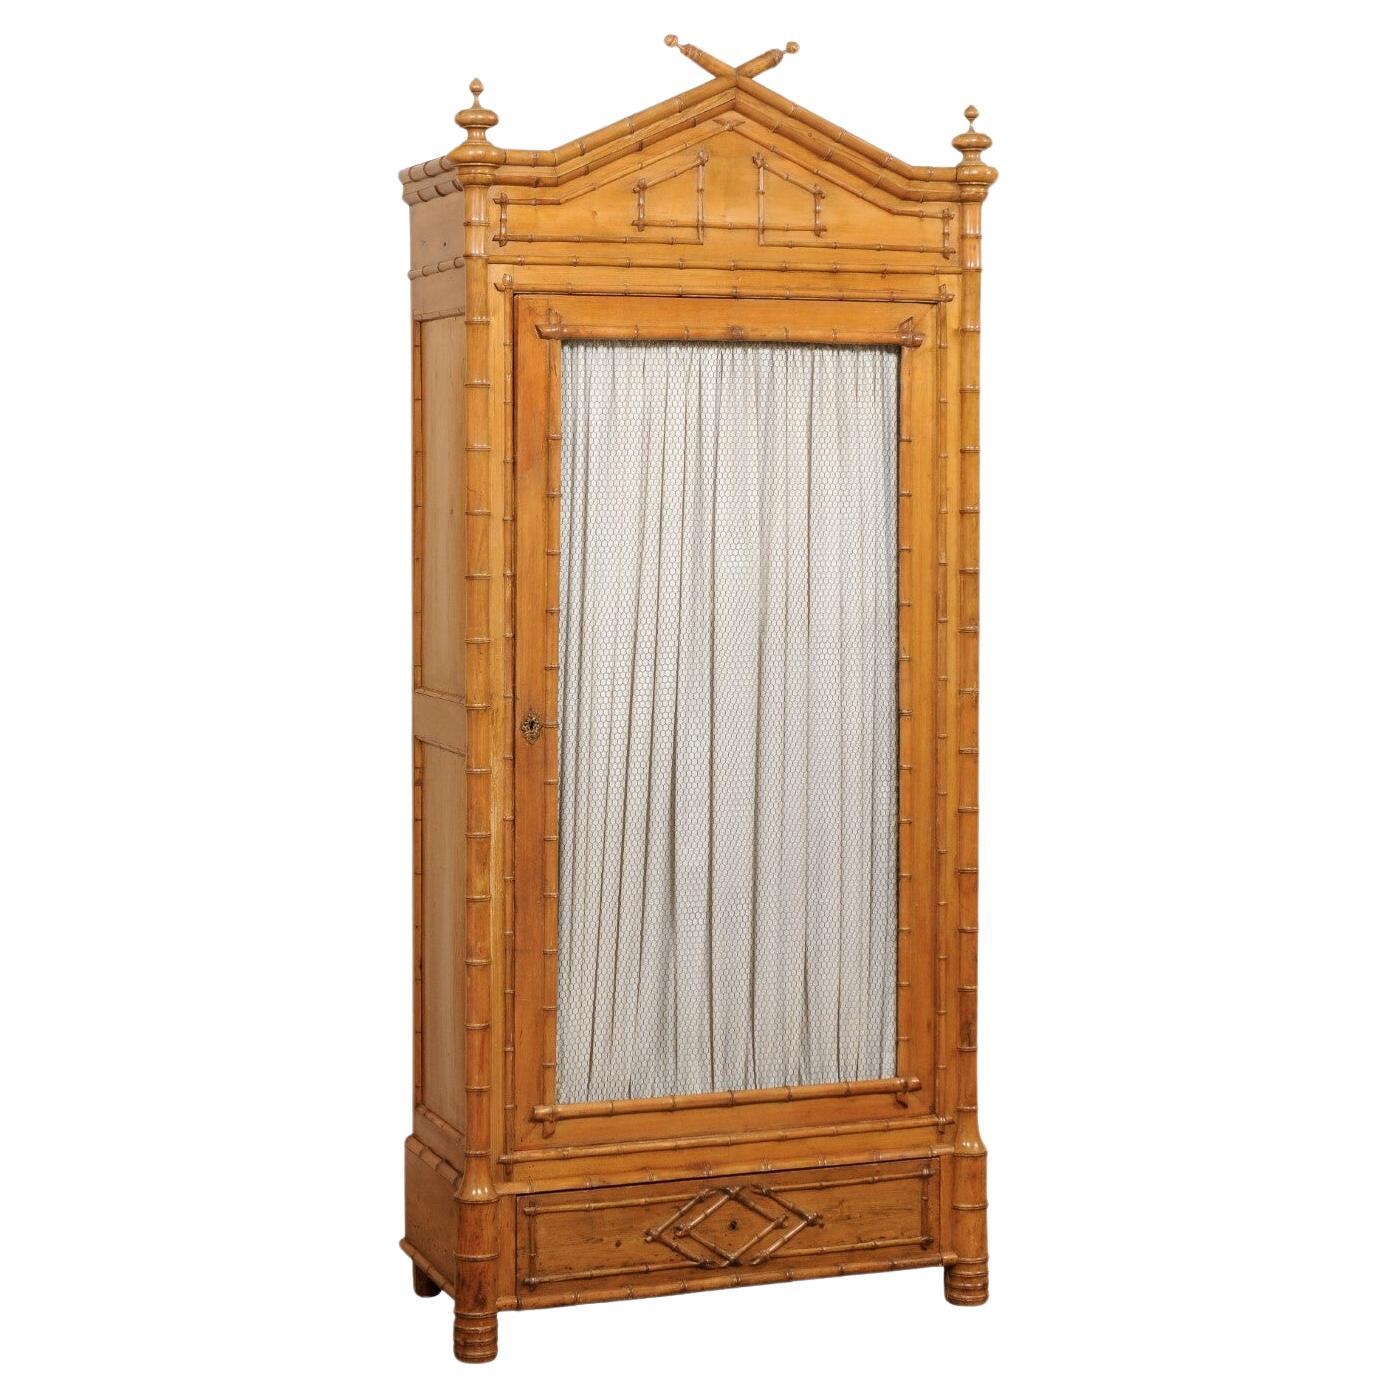 A Tall English Faux Bamboo Cabinet w/Glass Panel Door, Early 20th Century For Sale